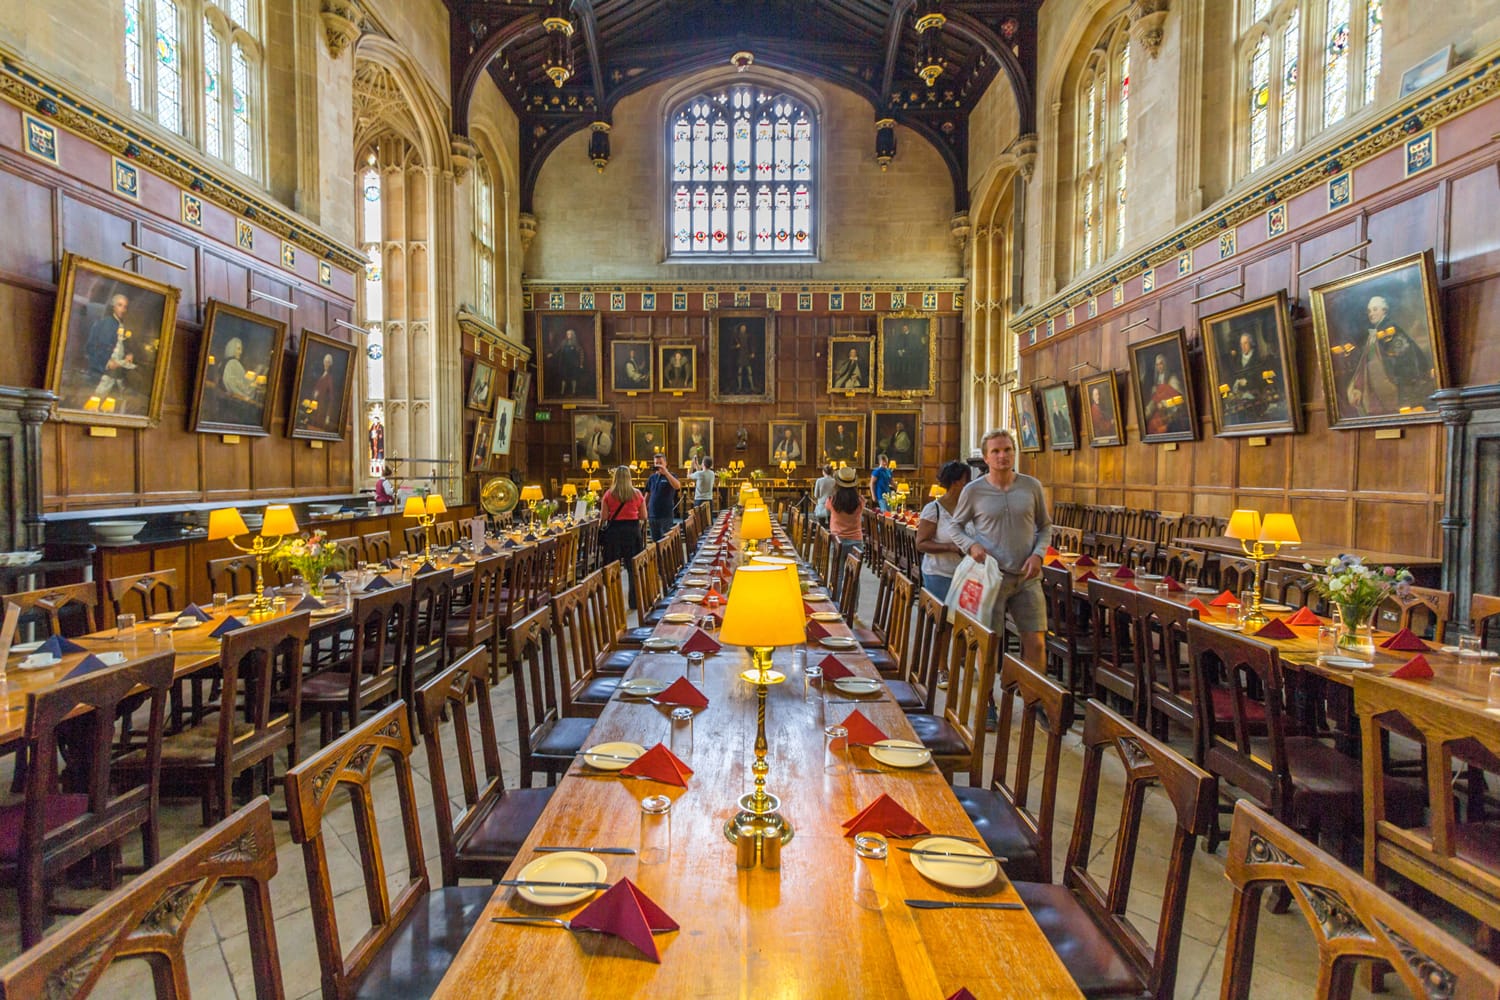 The great hall of Christ Church, University of Oxford, England. It is the center of college life where academic community congregates to dine each day.